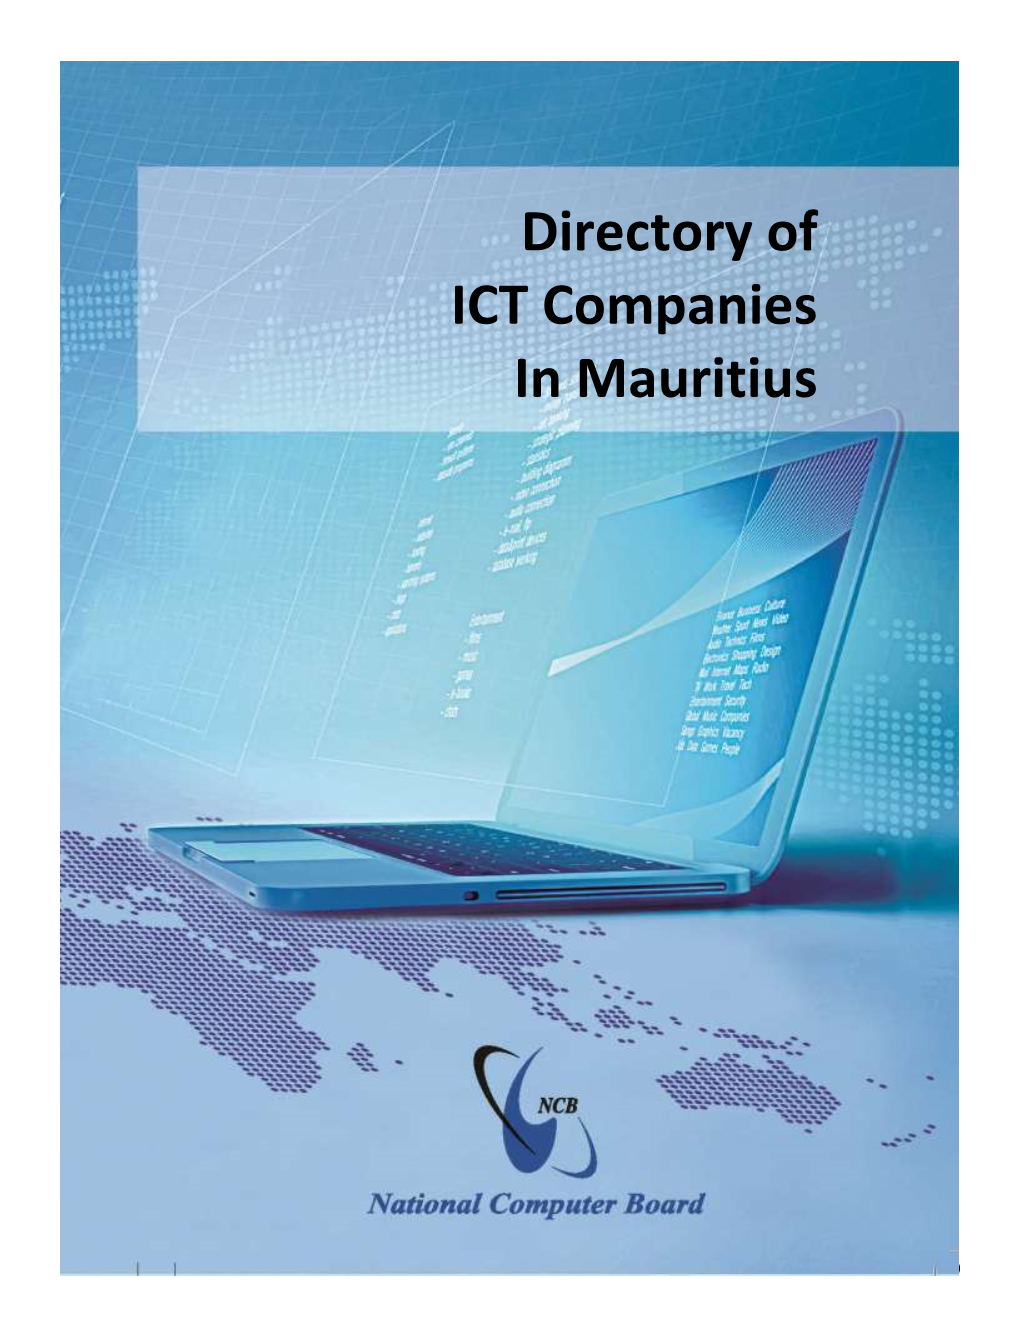 Directory of ICT Companies in Mauritius